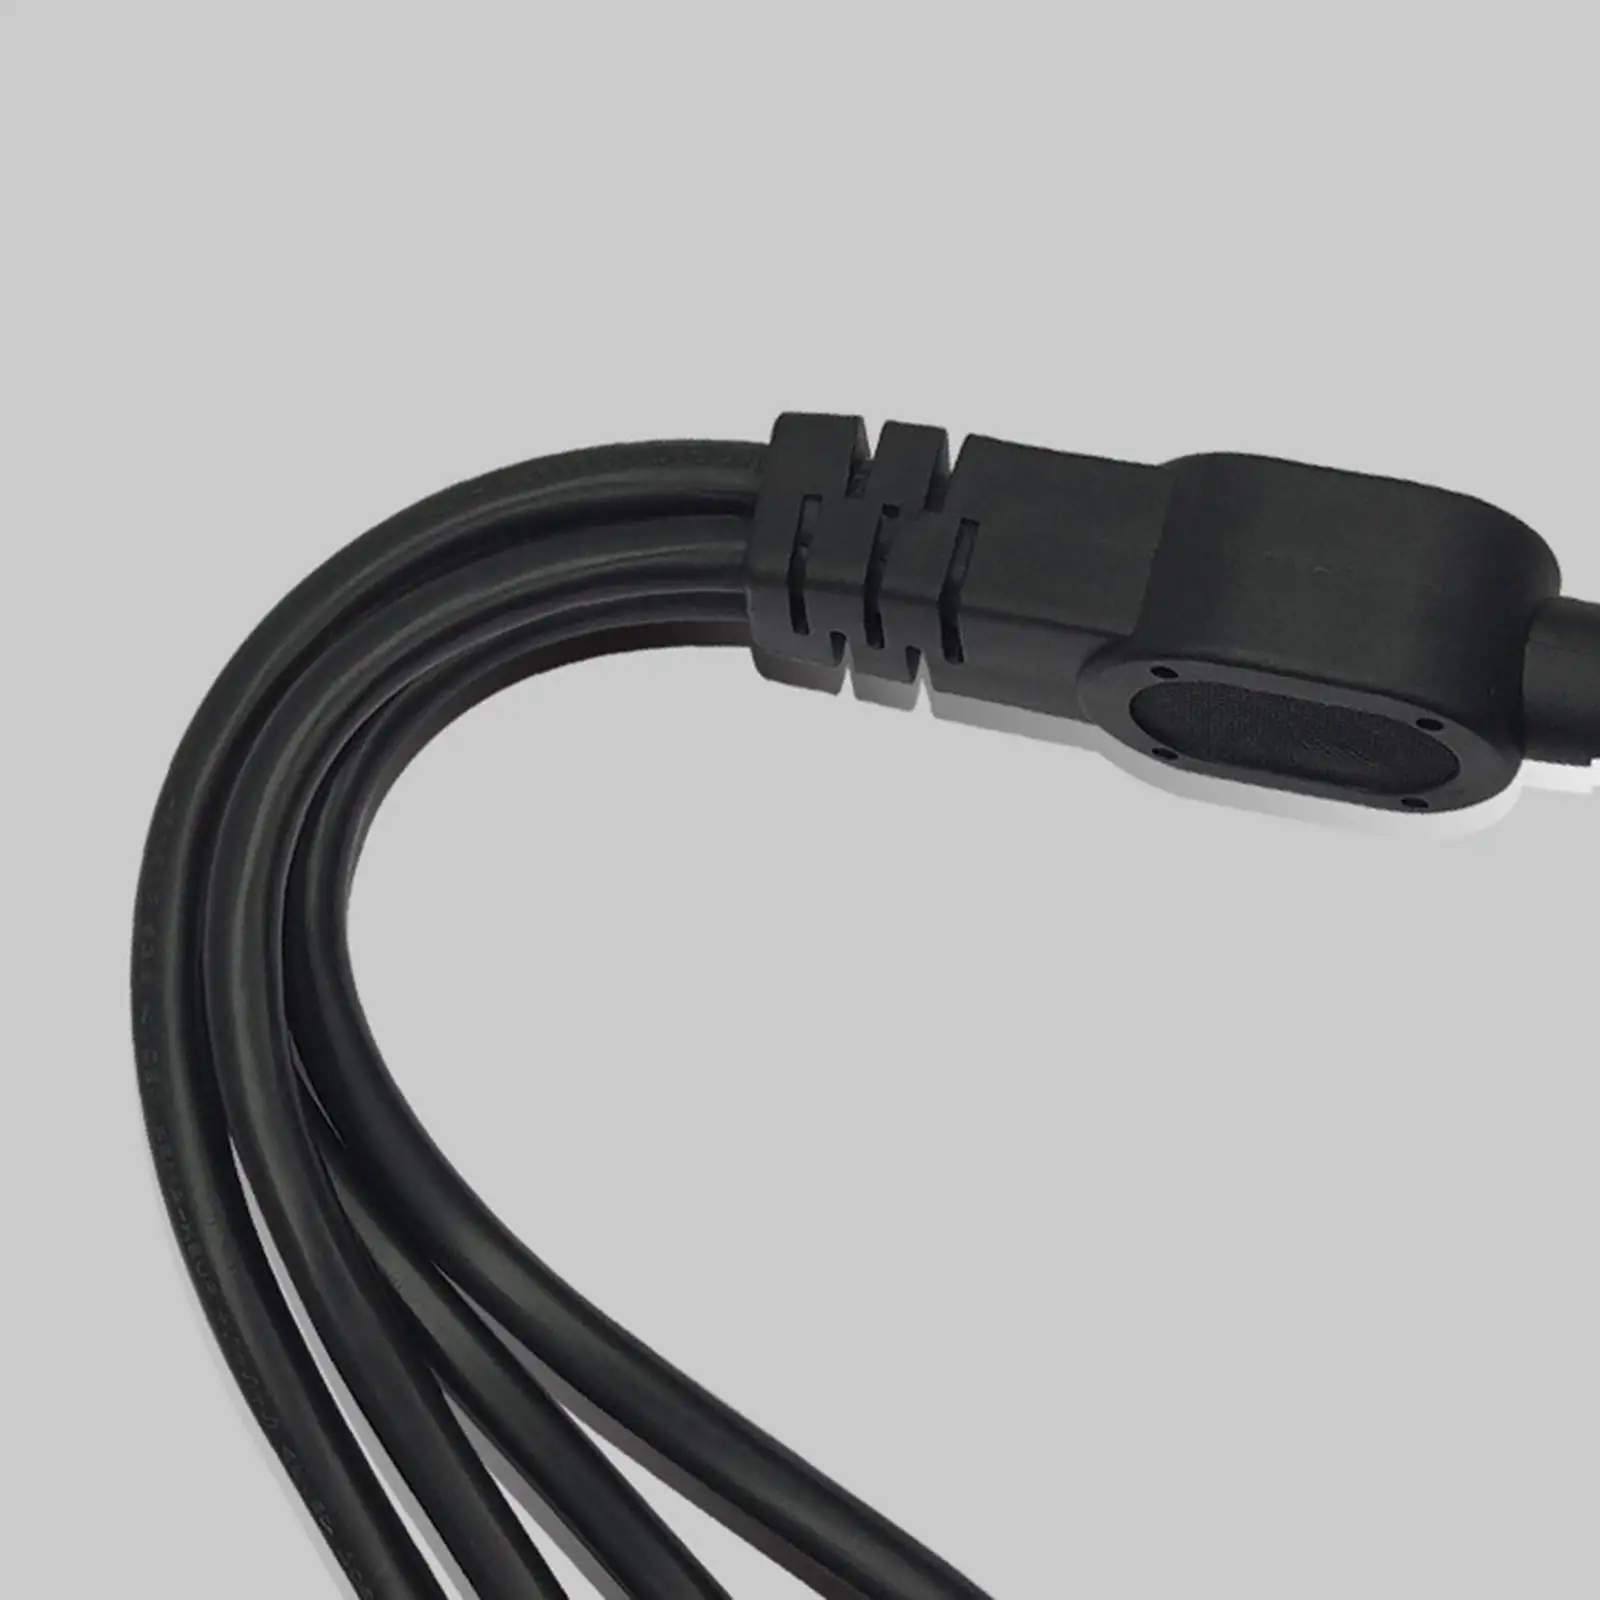 4 in 1 C14 to 4 x C13 Power Adapter Cable Cord IEC320 C14-Iec320 4*C13 Durable IEC320-C14 (Male) to 4x C13 (Female) for Ups Host